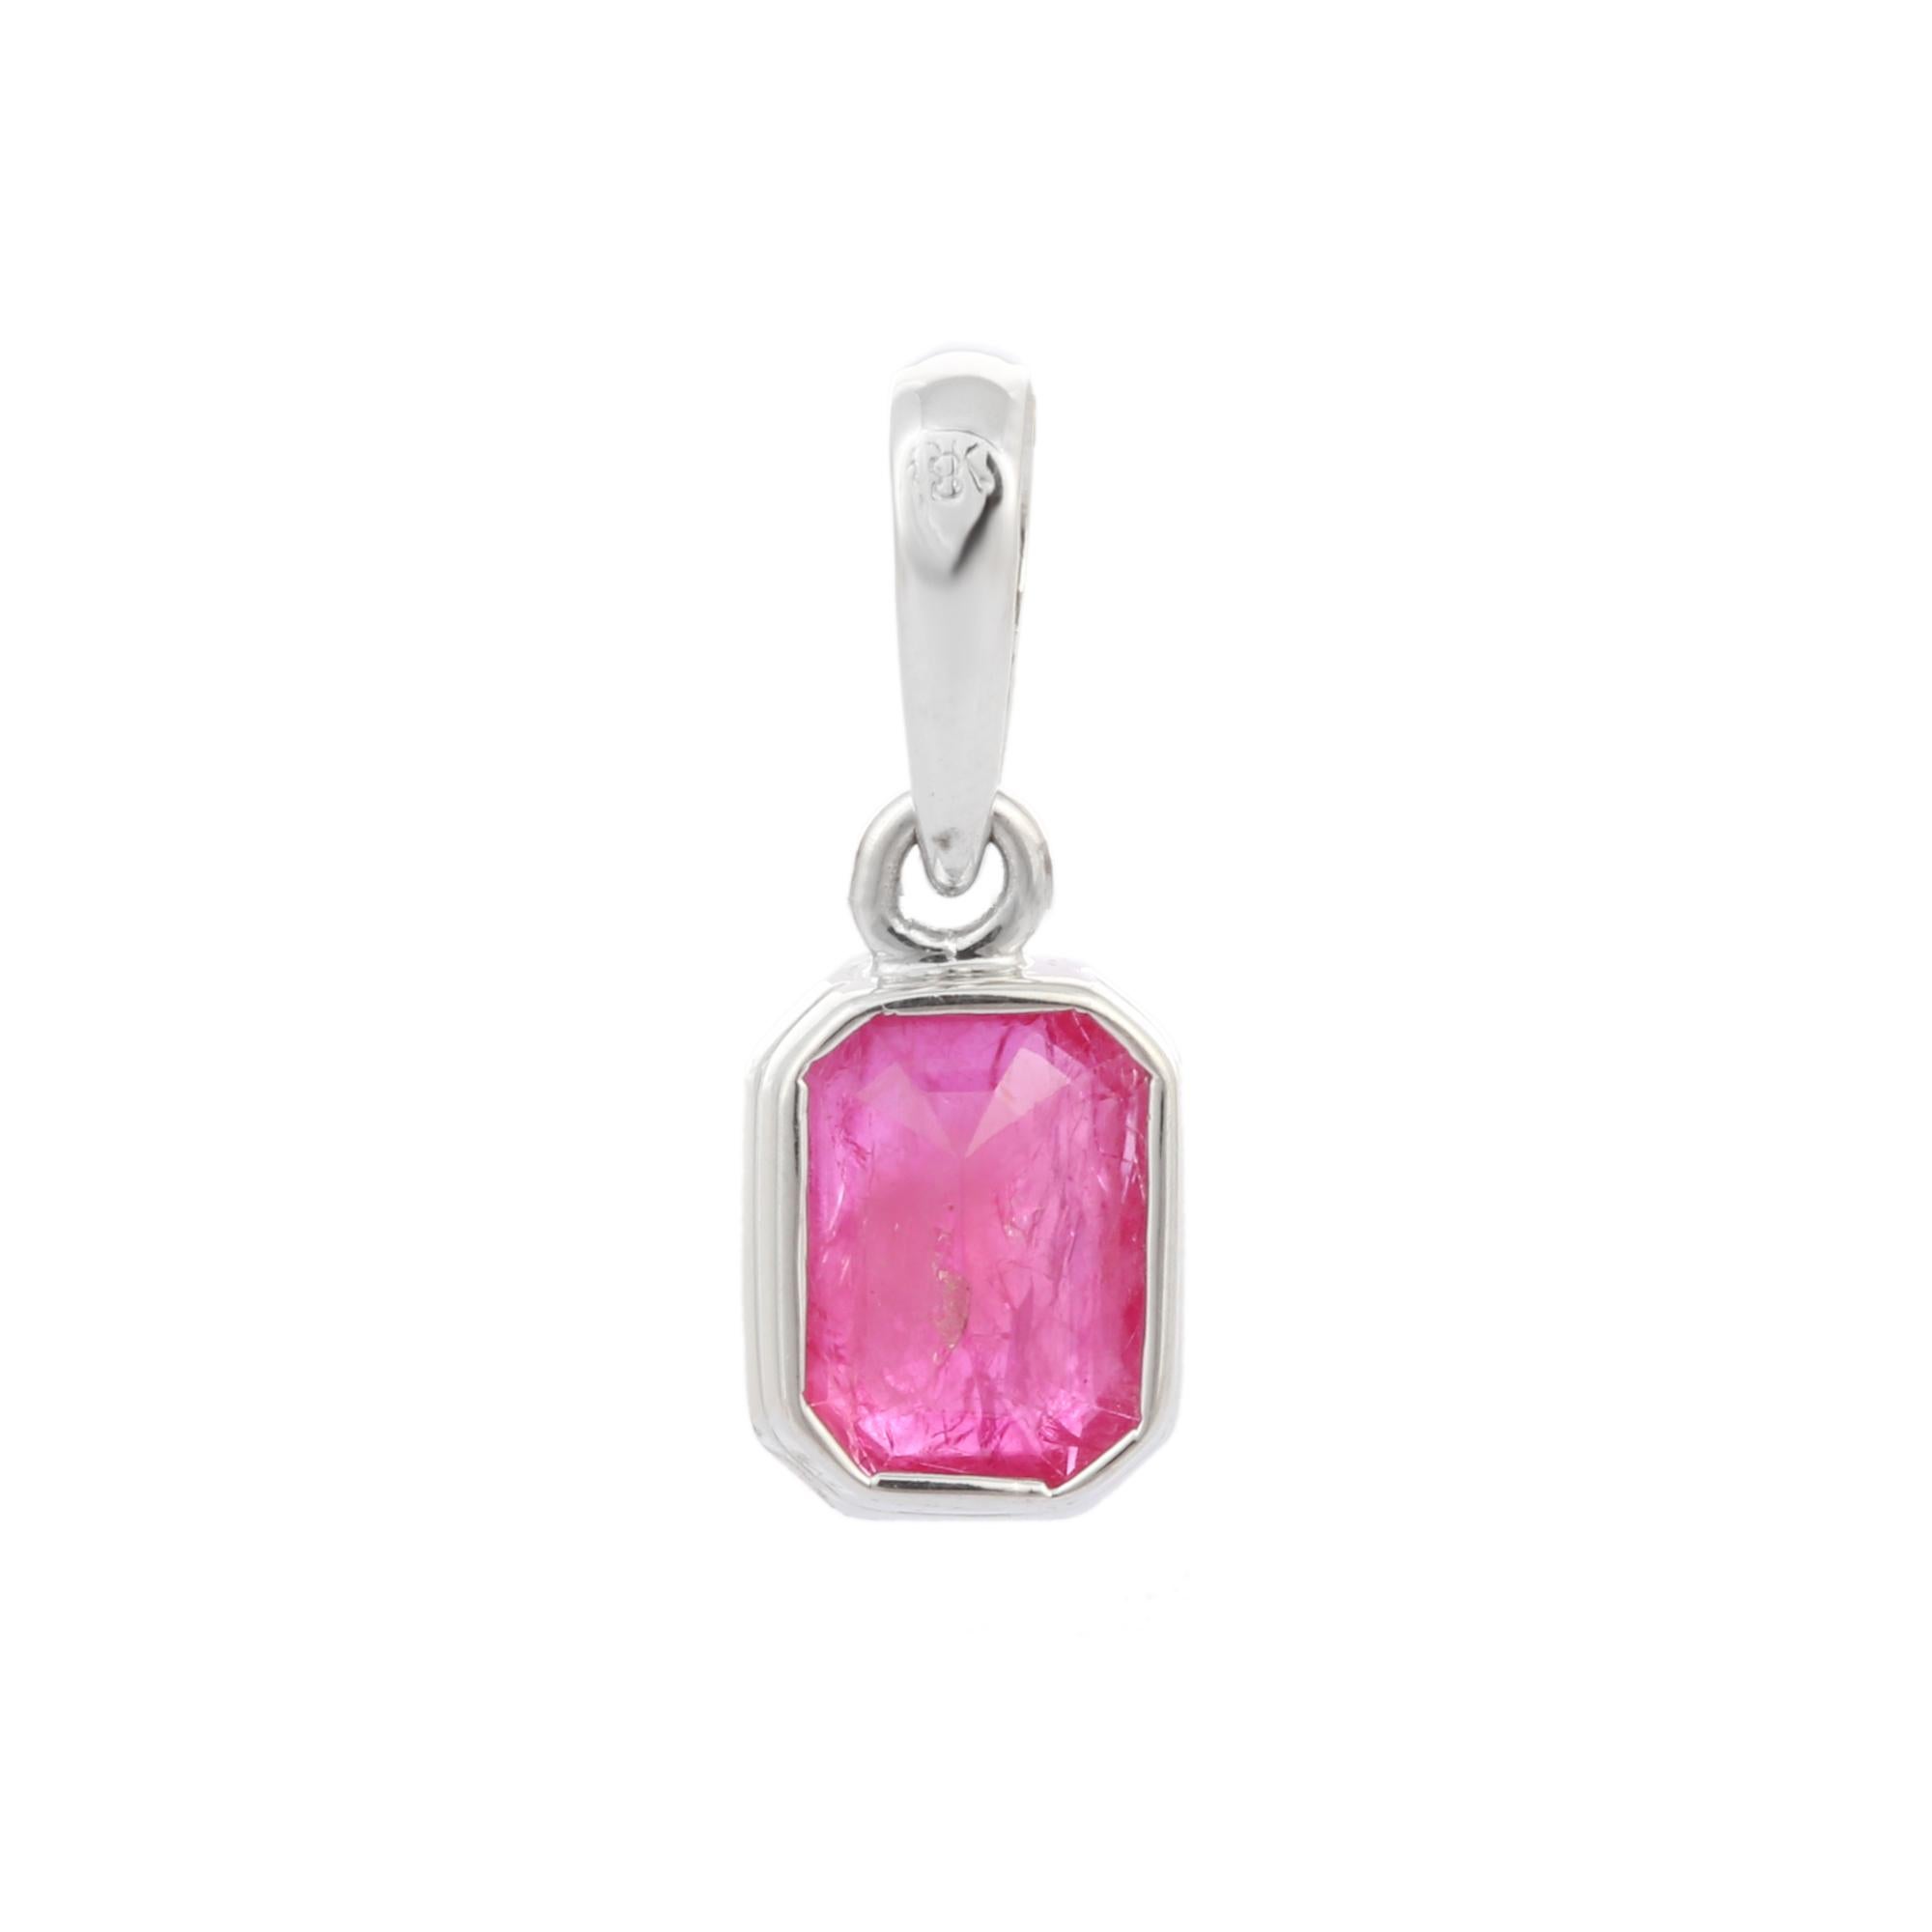 Modern Octagon Cut Ruby Pendant in 18K Gold. It has a octagon cut ruby that completes your look with a decent touch. Pendants are used to wear or gifted to represent love and promises. It's an attractive jewelry piece that goes with every basic